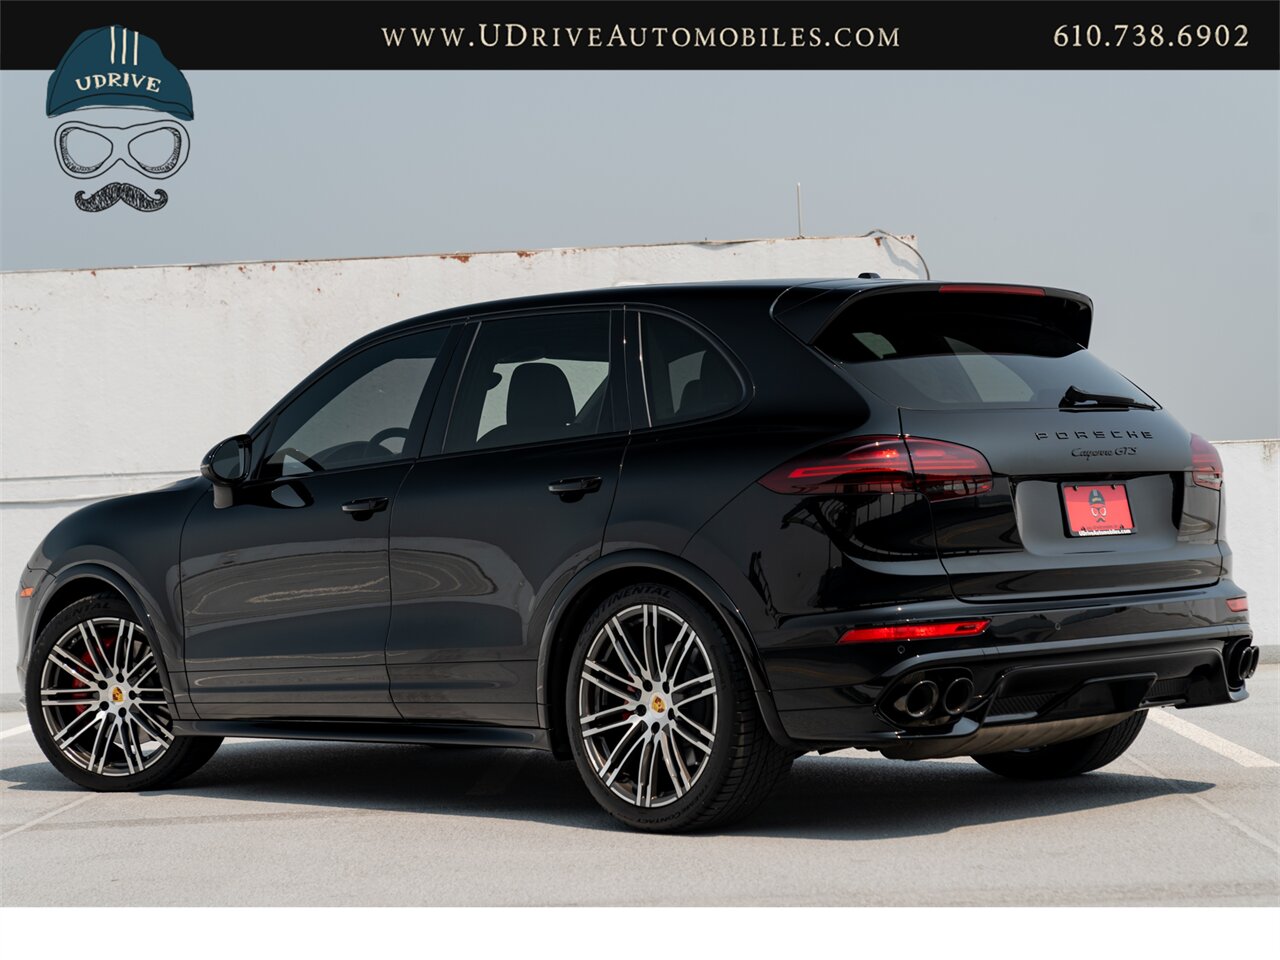 2016 Porsche Cayenne GTS  CPO Warranty 21in Whls Sport Chrono Red Dial Alcantara Red Belts Pano - Photo 5 - West Chester, PA 19382